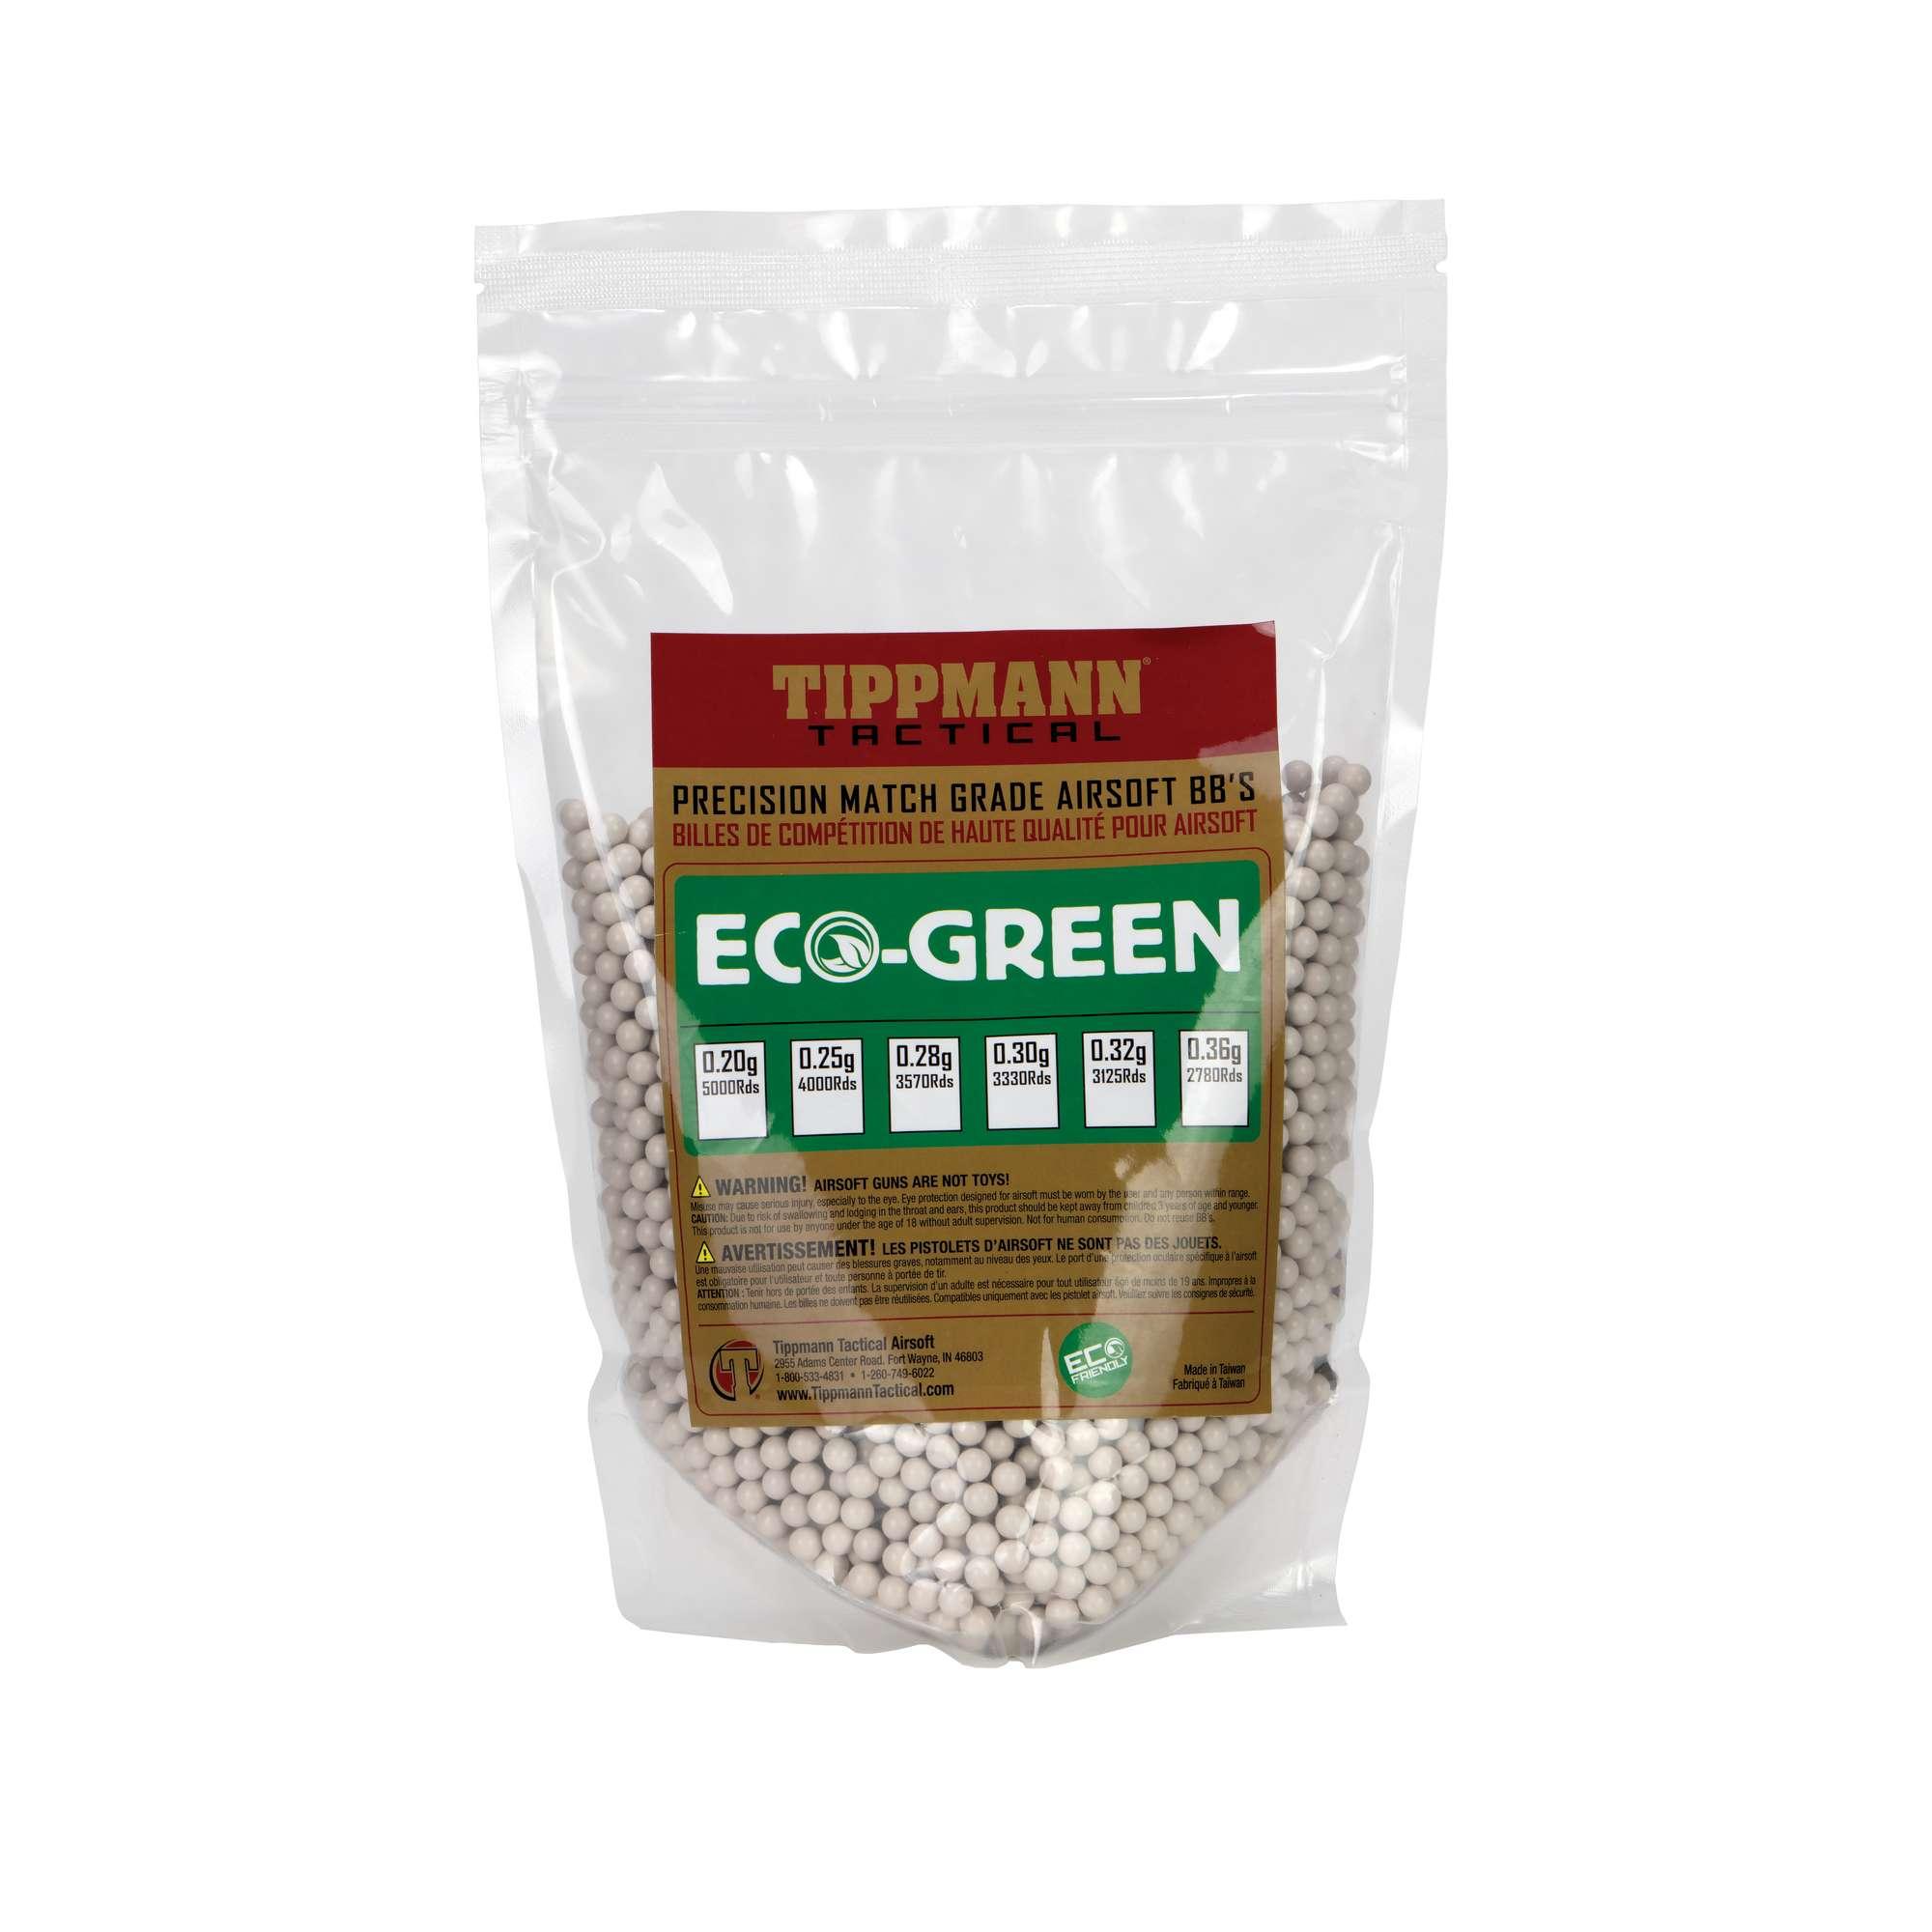 Tippmann Tactical Eco Airsoft Ammo 30g 3,300ct